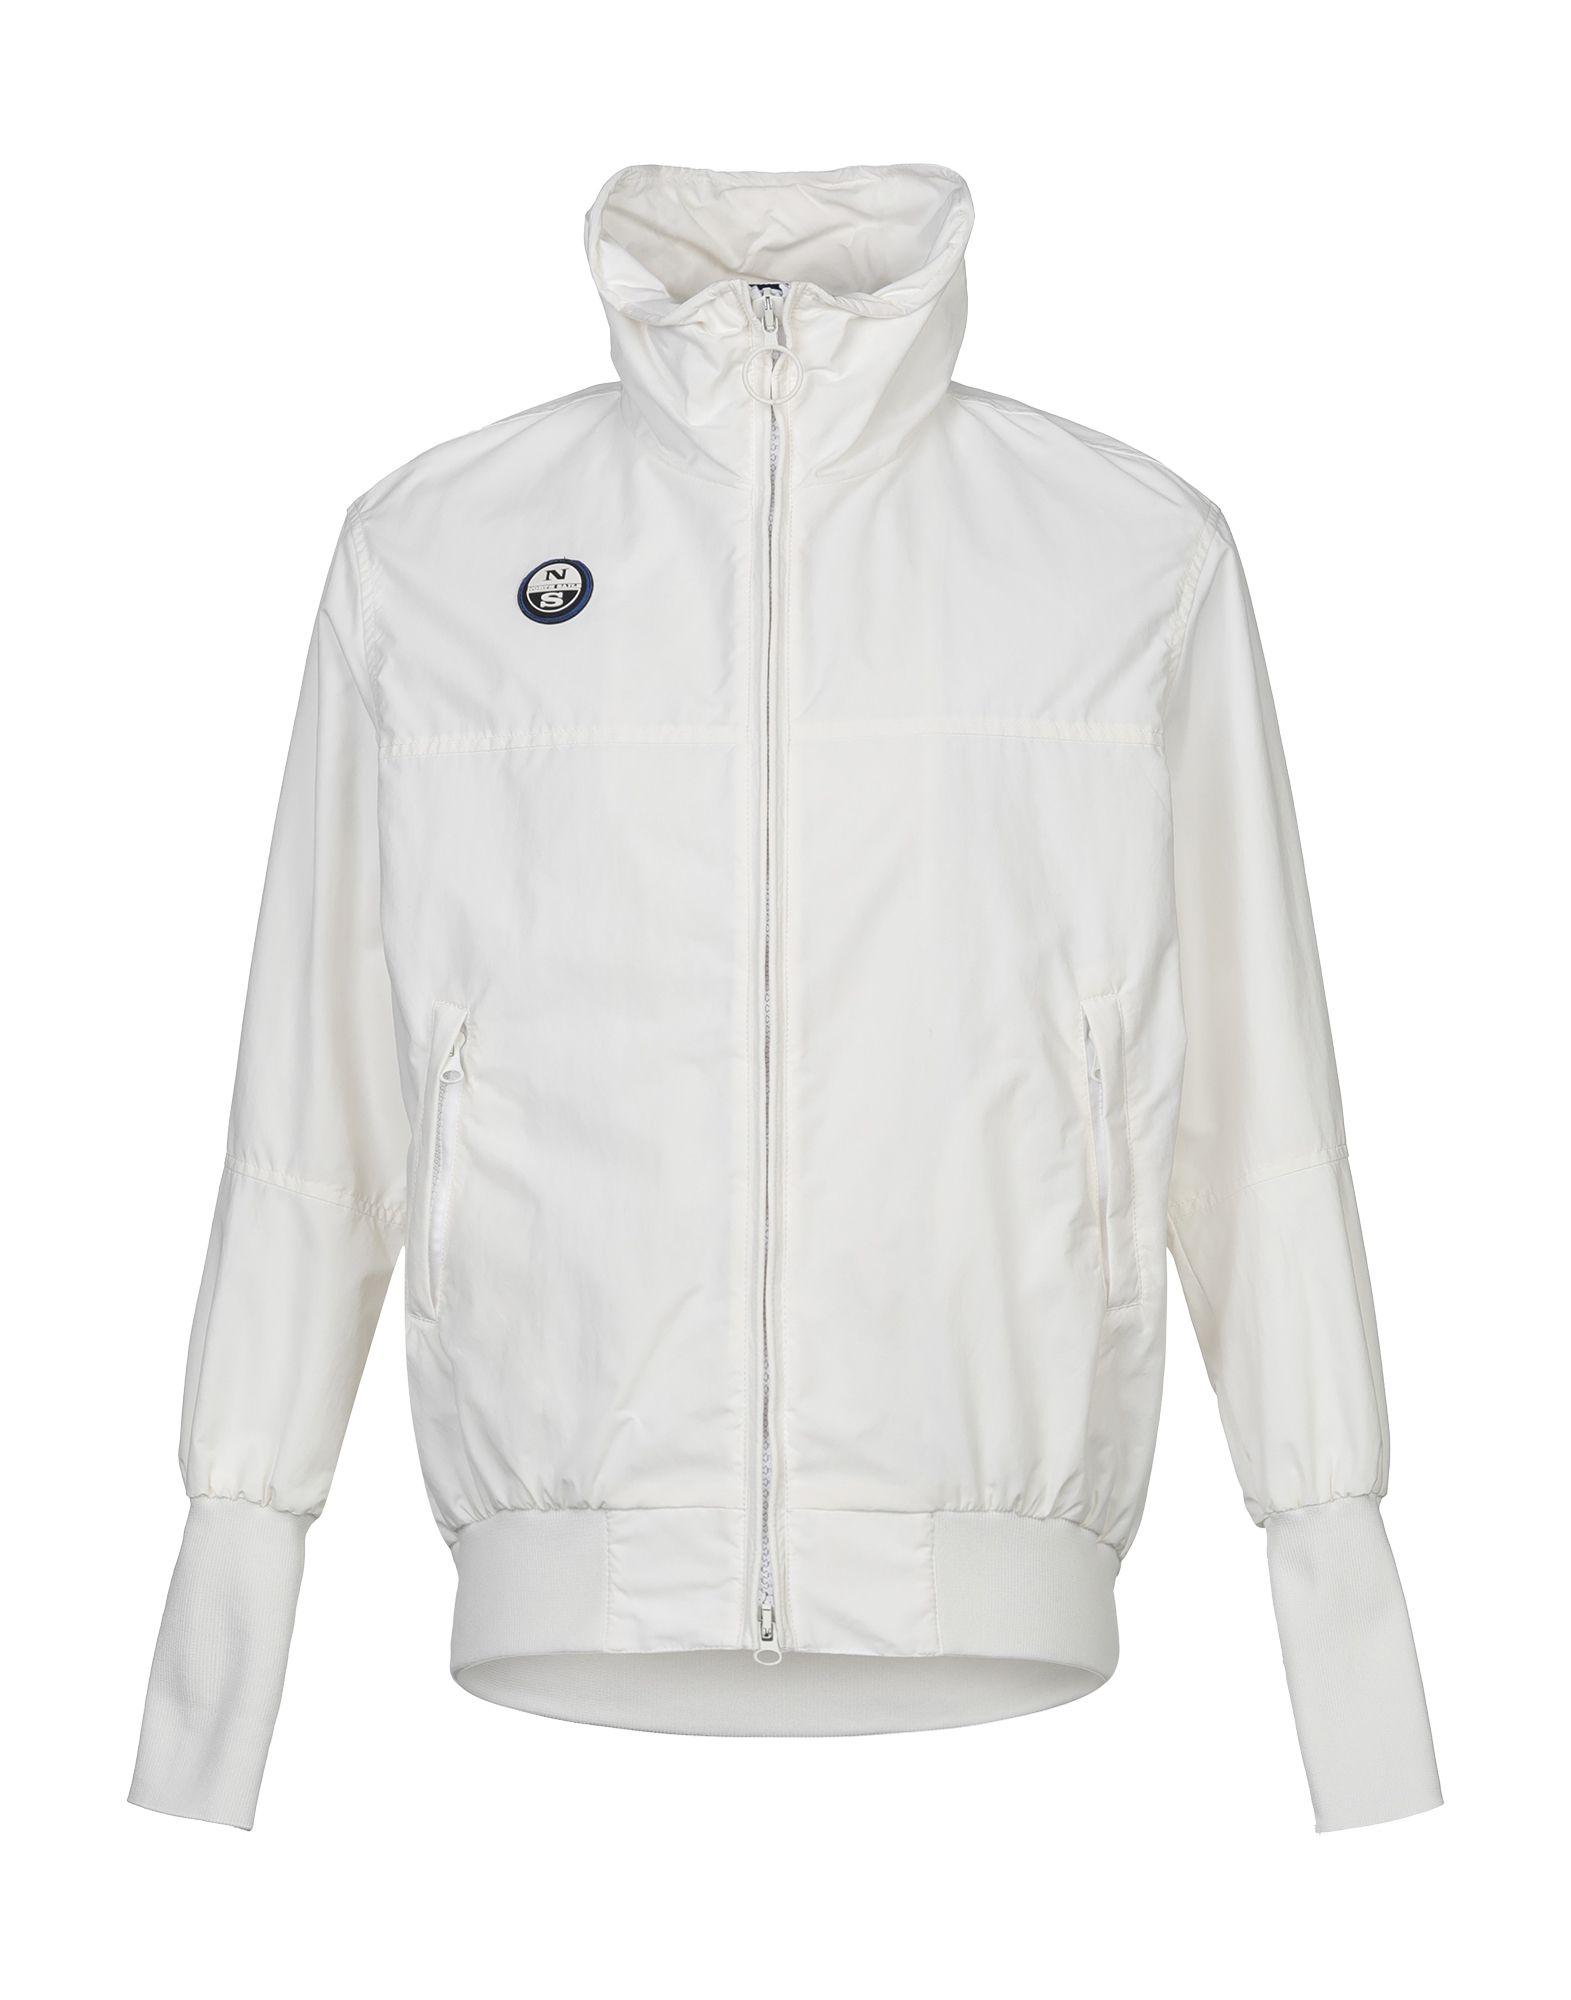 North Sails Jacket in White for Men - Lyst